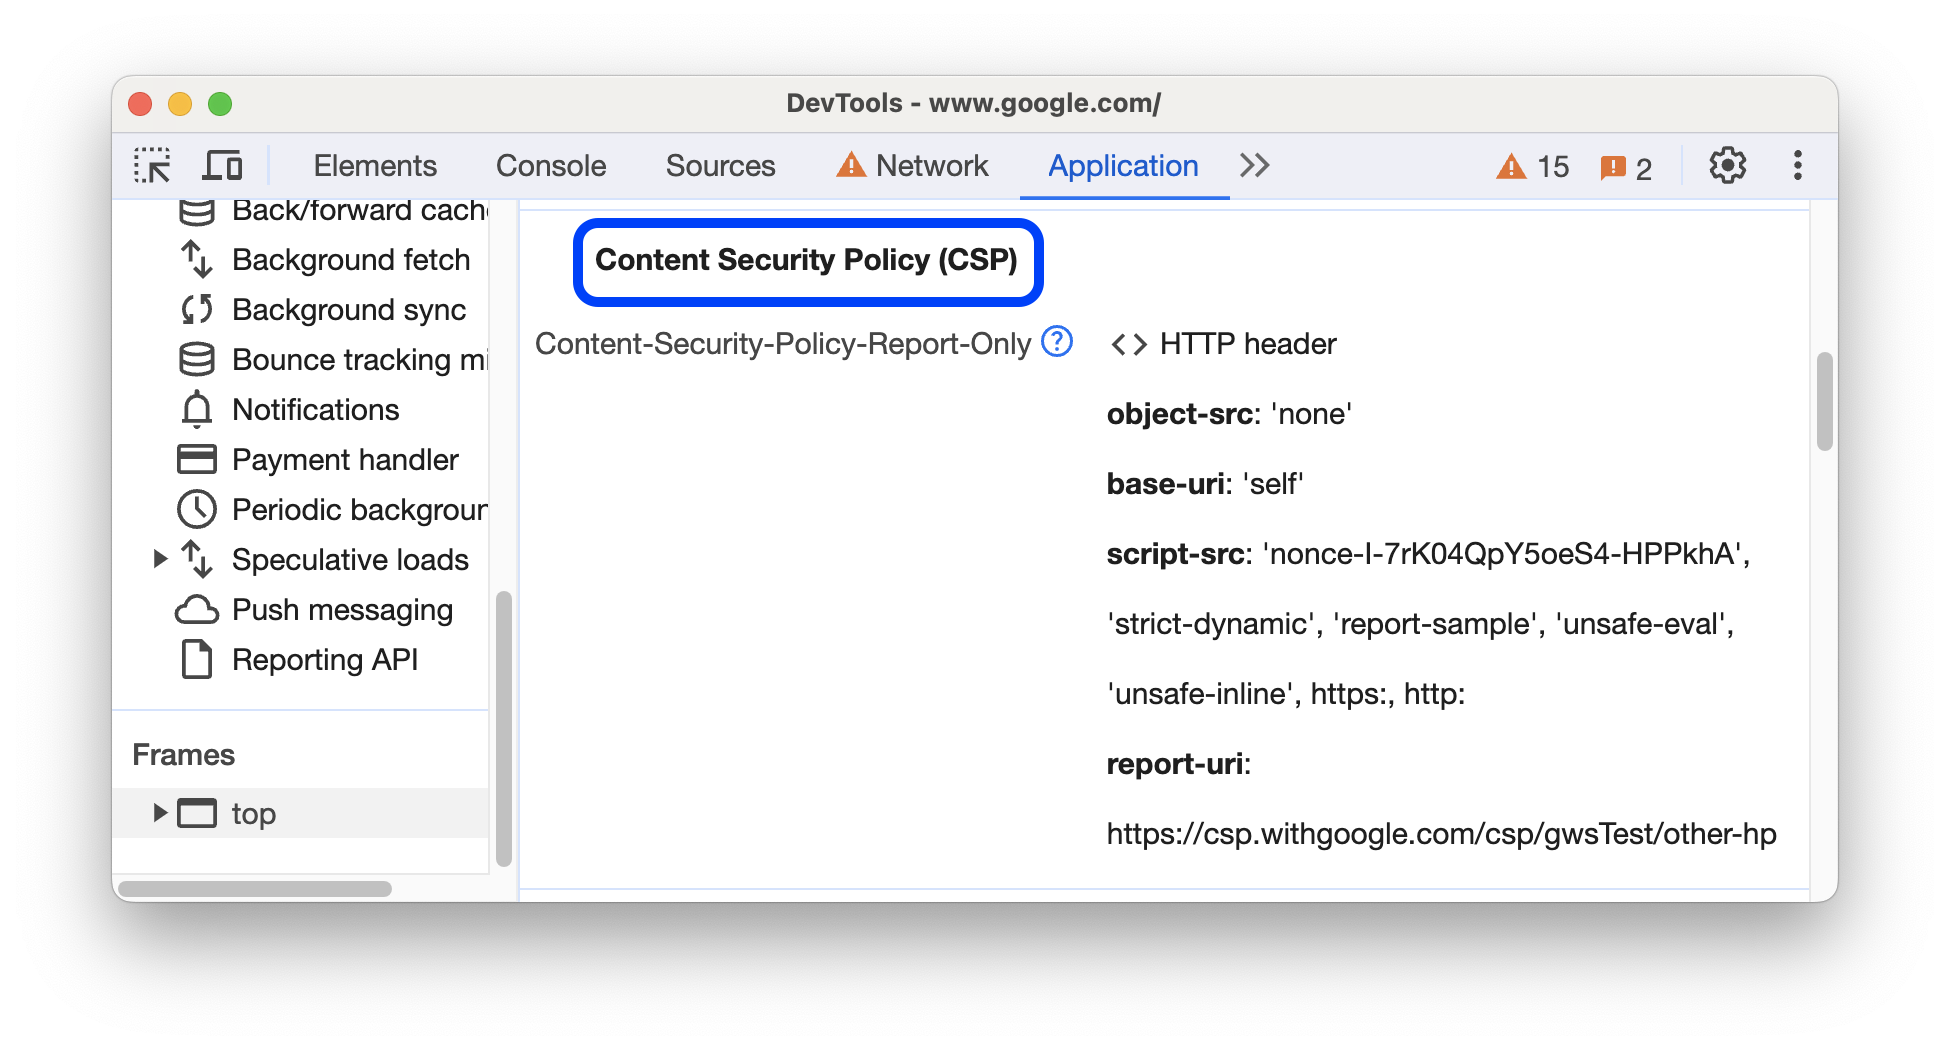 Content Security Policy di panel Application.